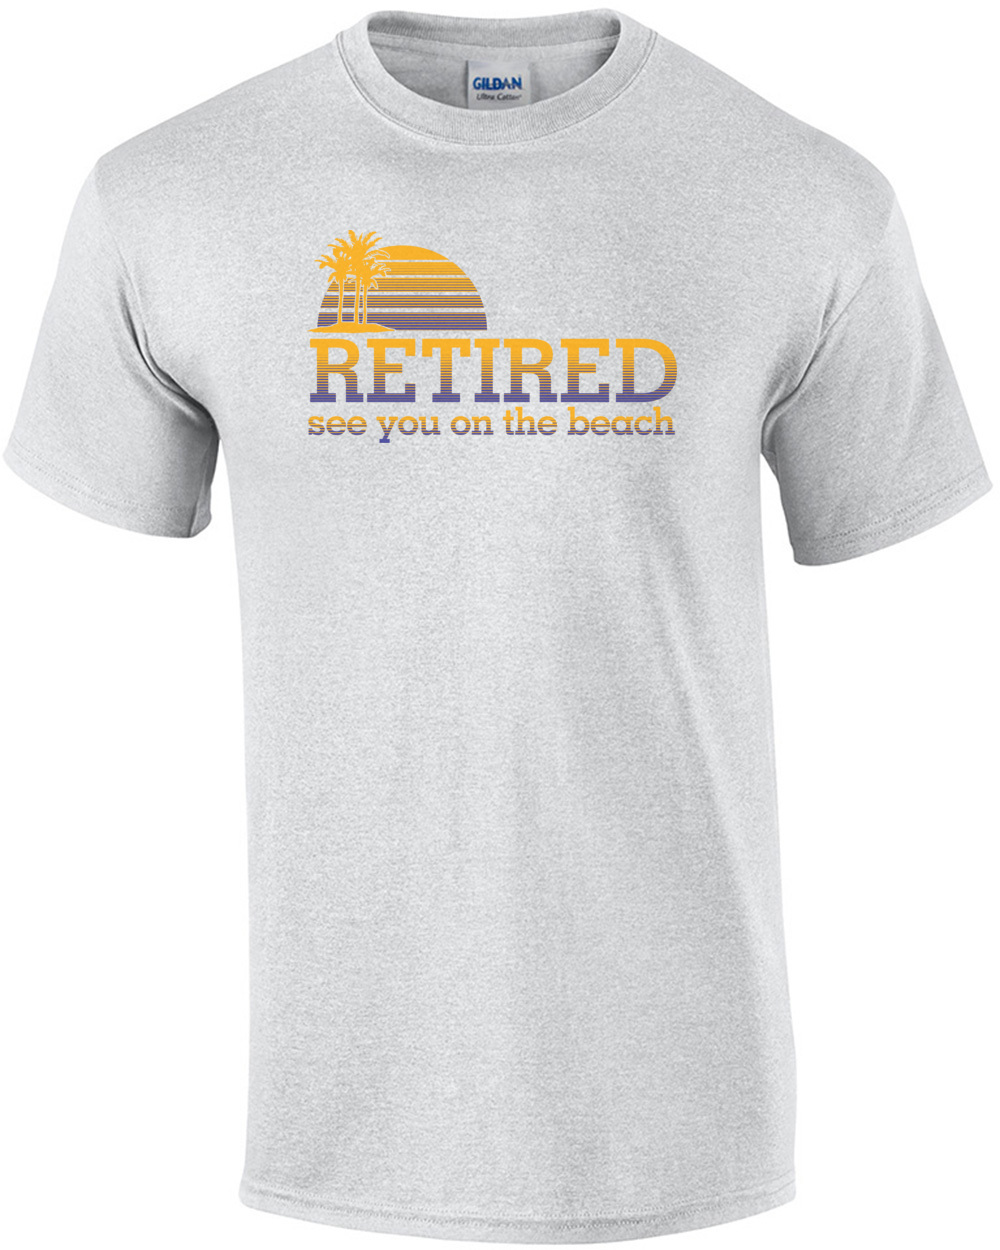 See You On The Beach Retired! Short-Sleeve Unisex T-Shirt 